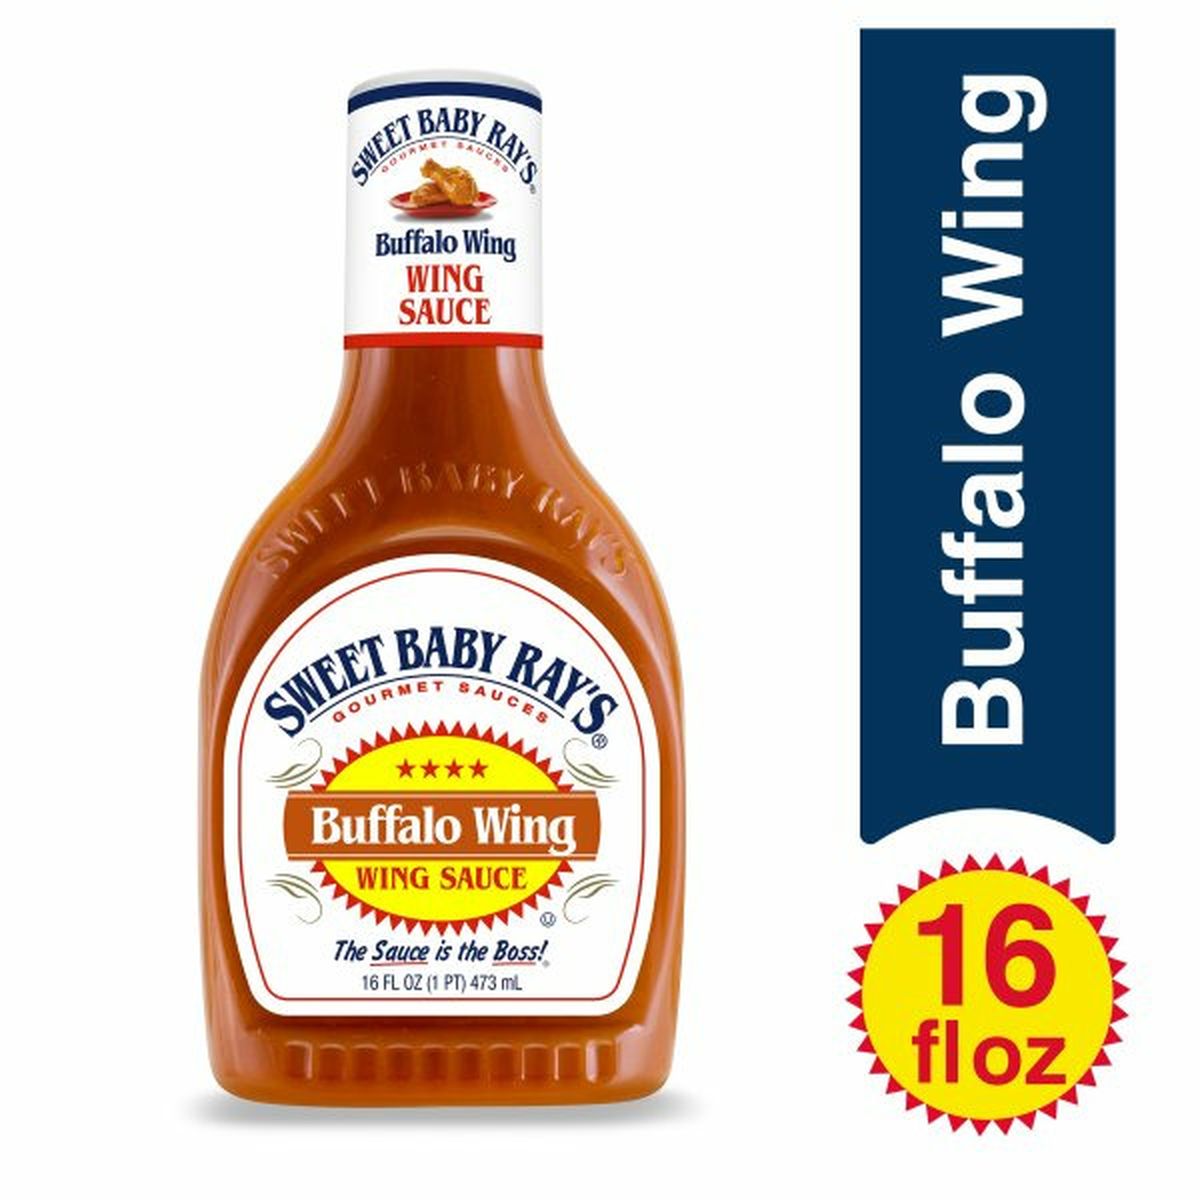 Calories in Sweet Baby Ray's Wing Sauce, Buffalo Wing